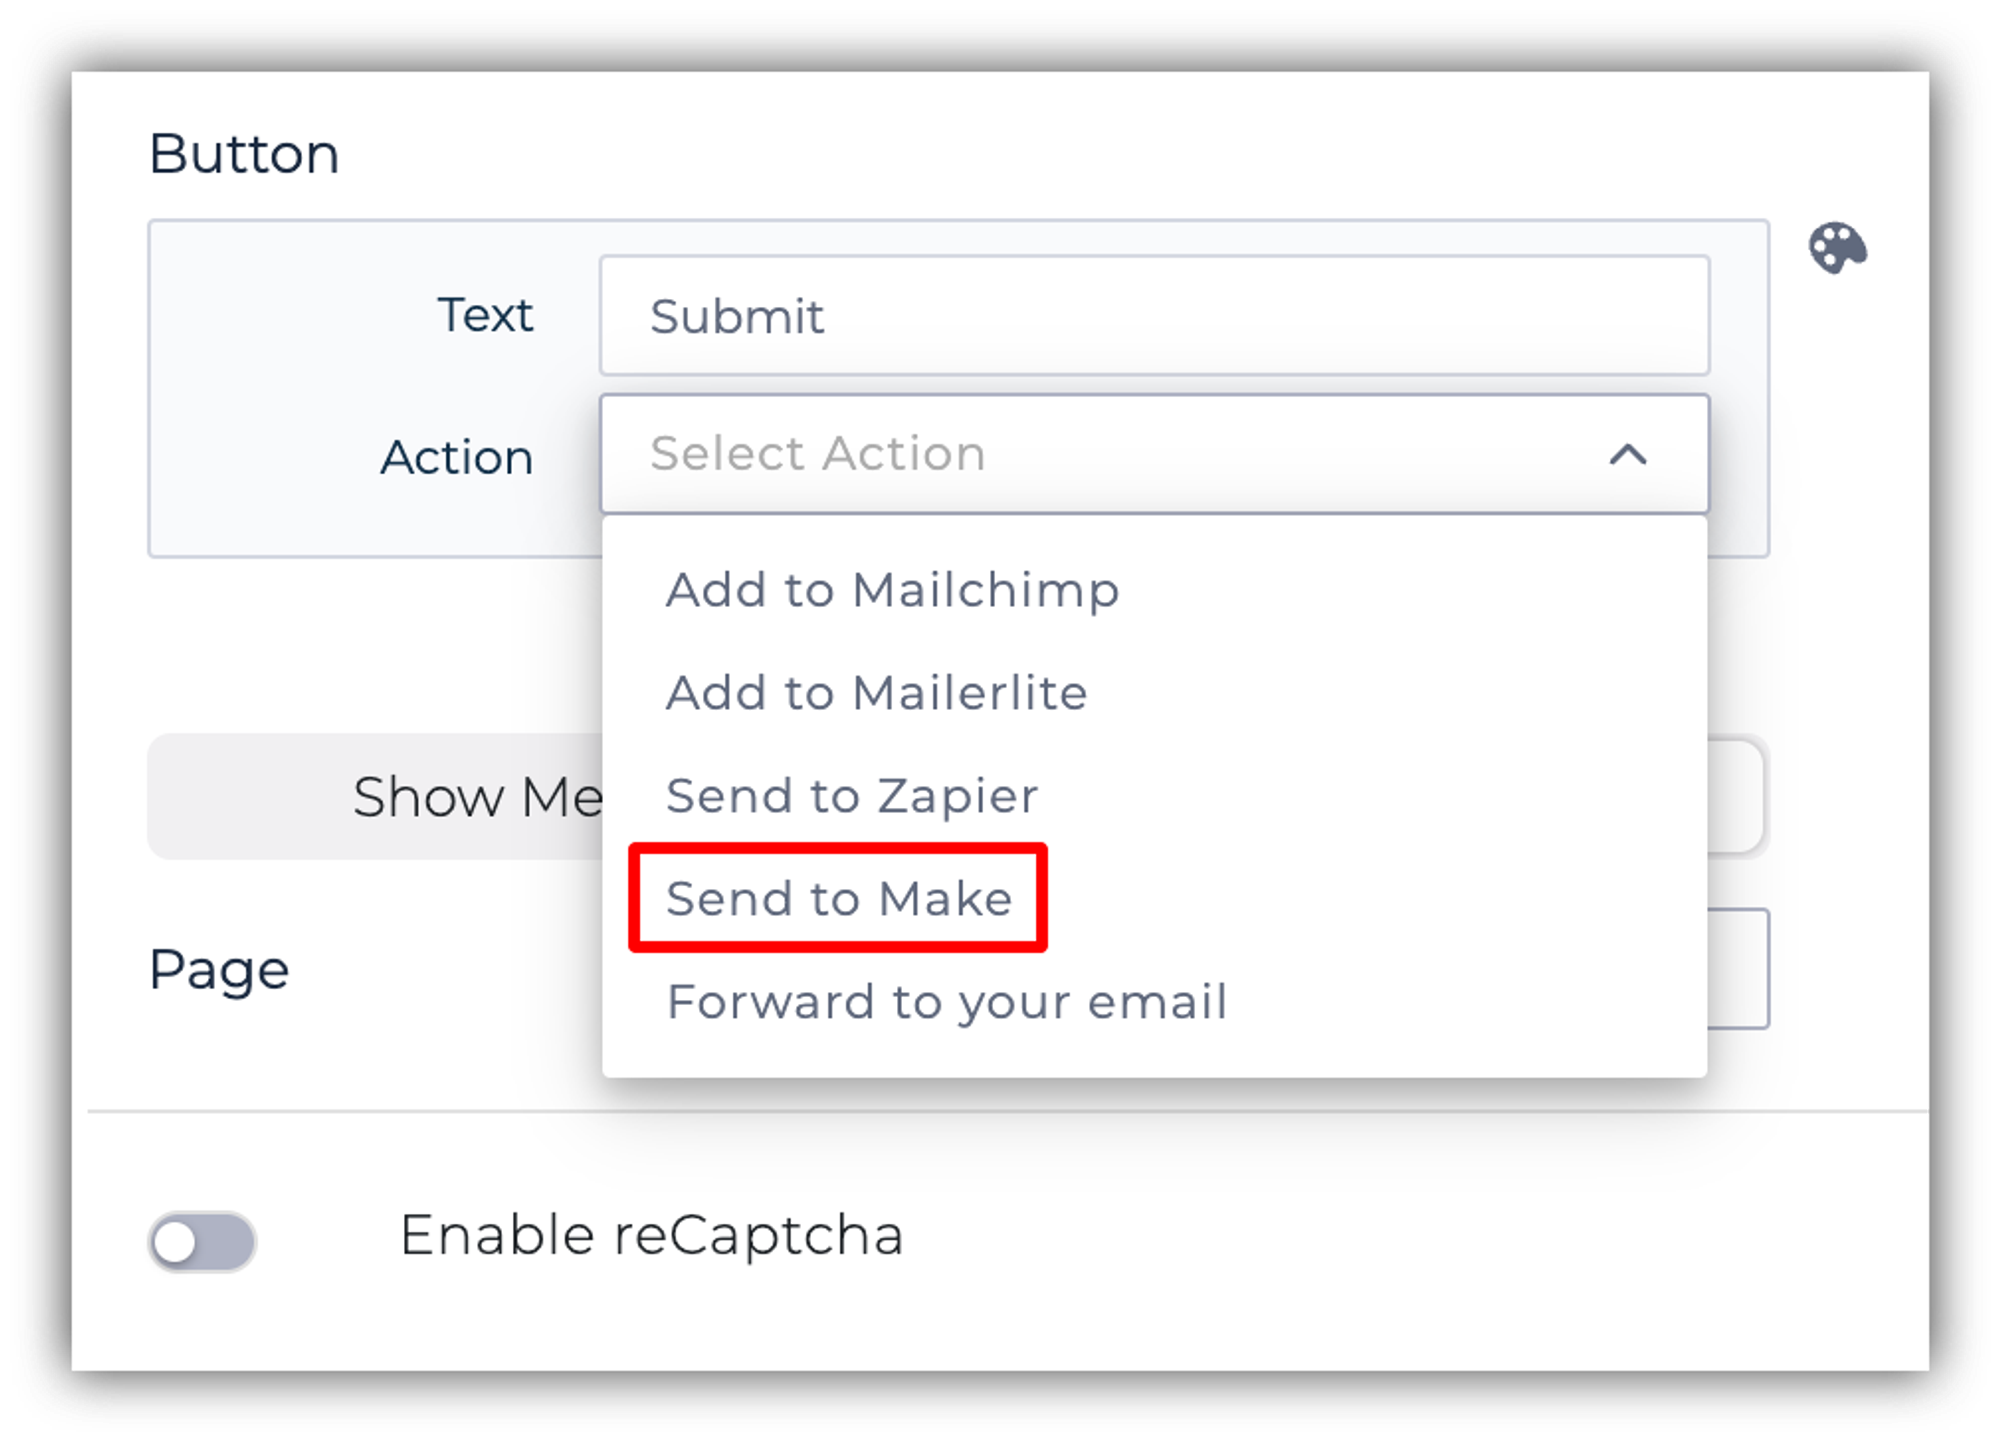 “Send to Make” action